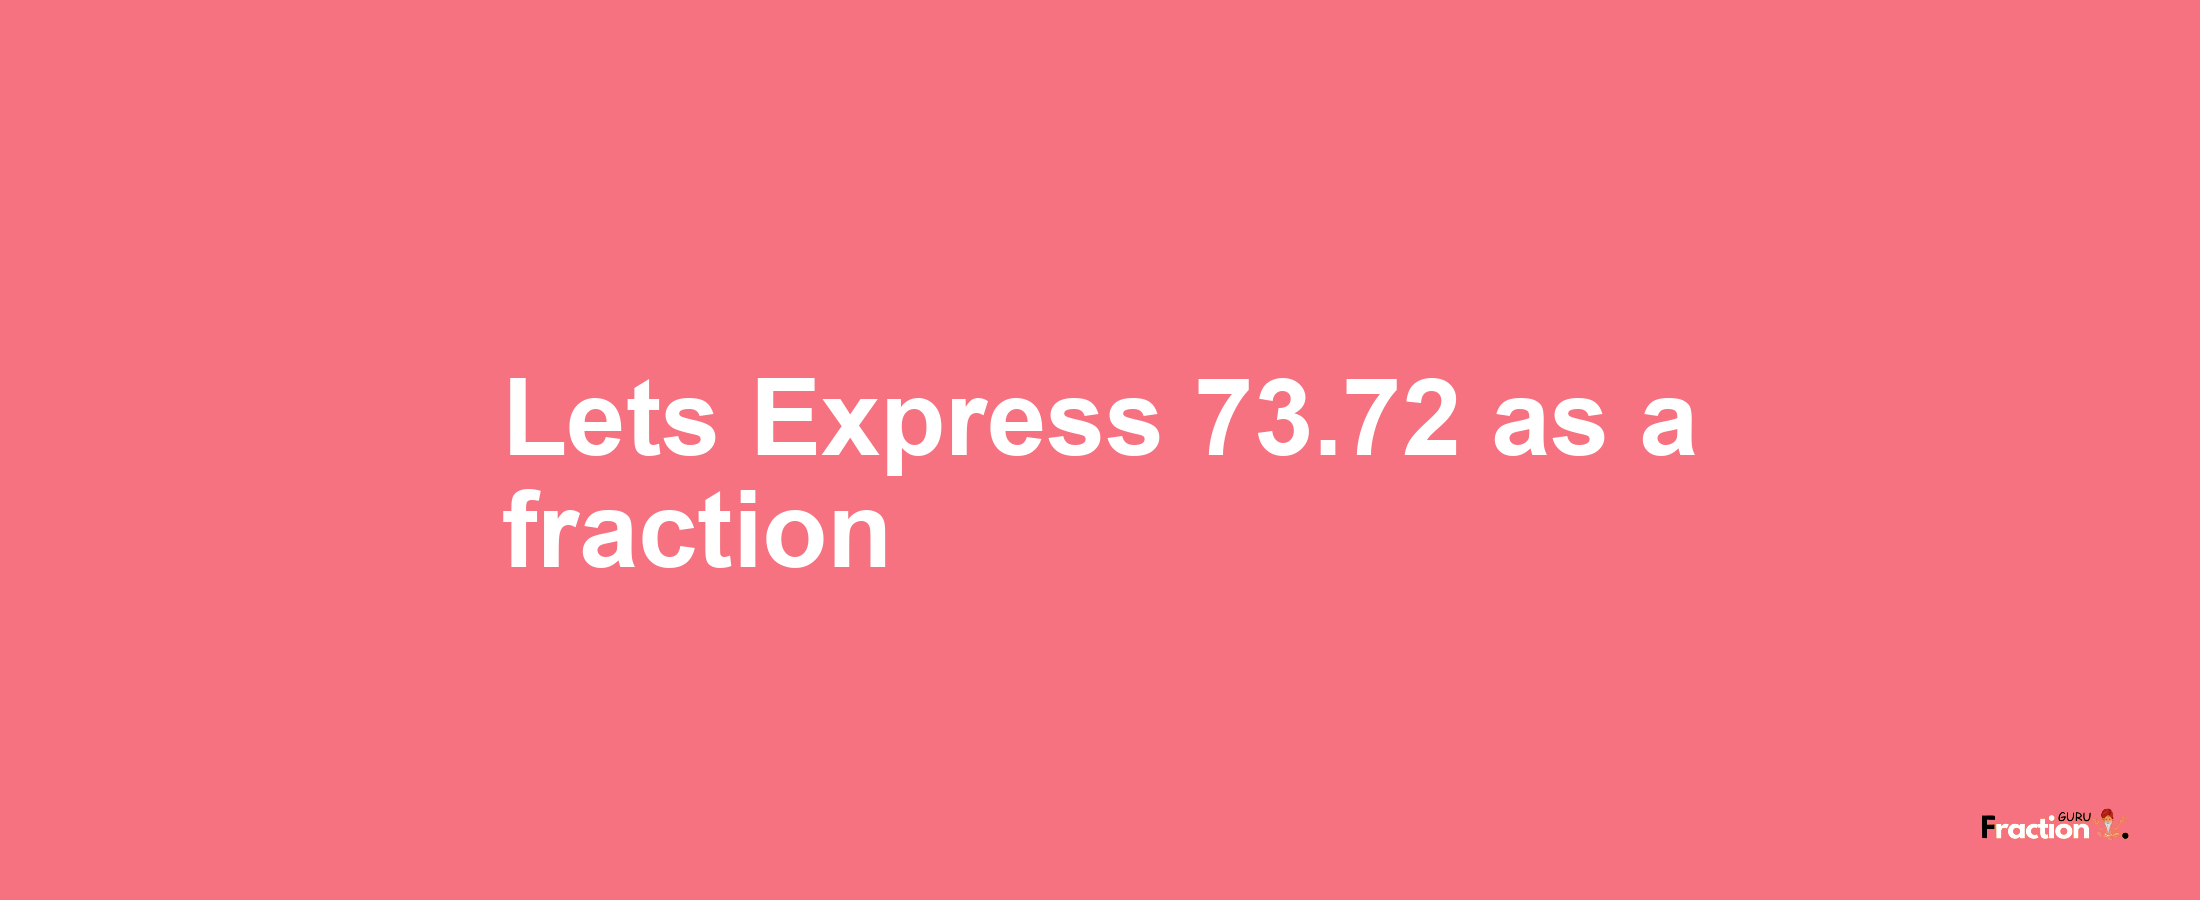 Lets Express 73.72 as afraction